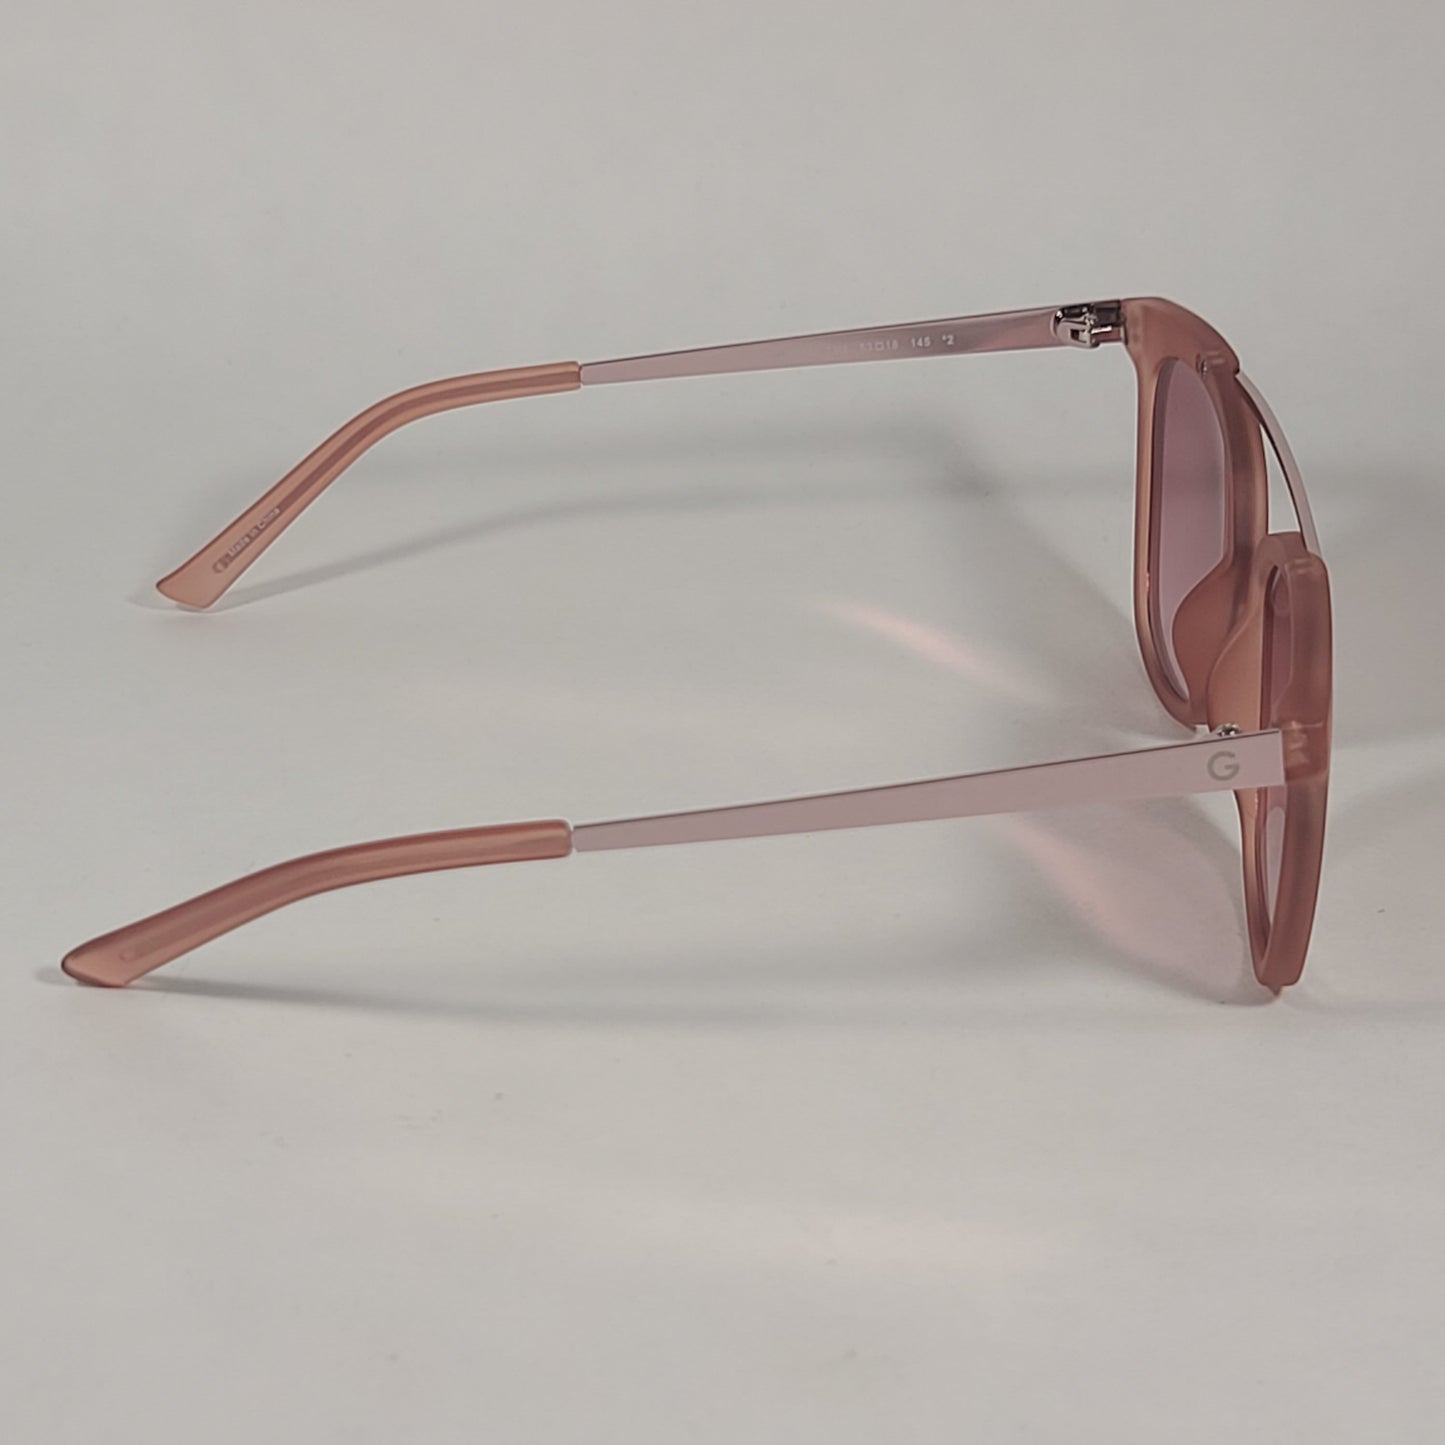 G By Guess Sunglasses Rose Gold And Pink Frame Pink Mirror Lens GG1154 73U - Sunglasses